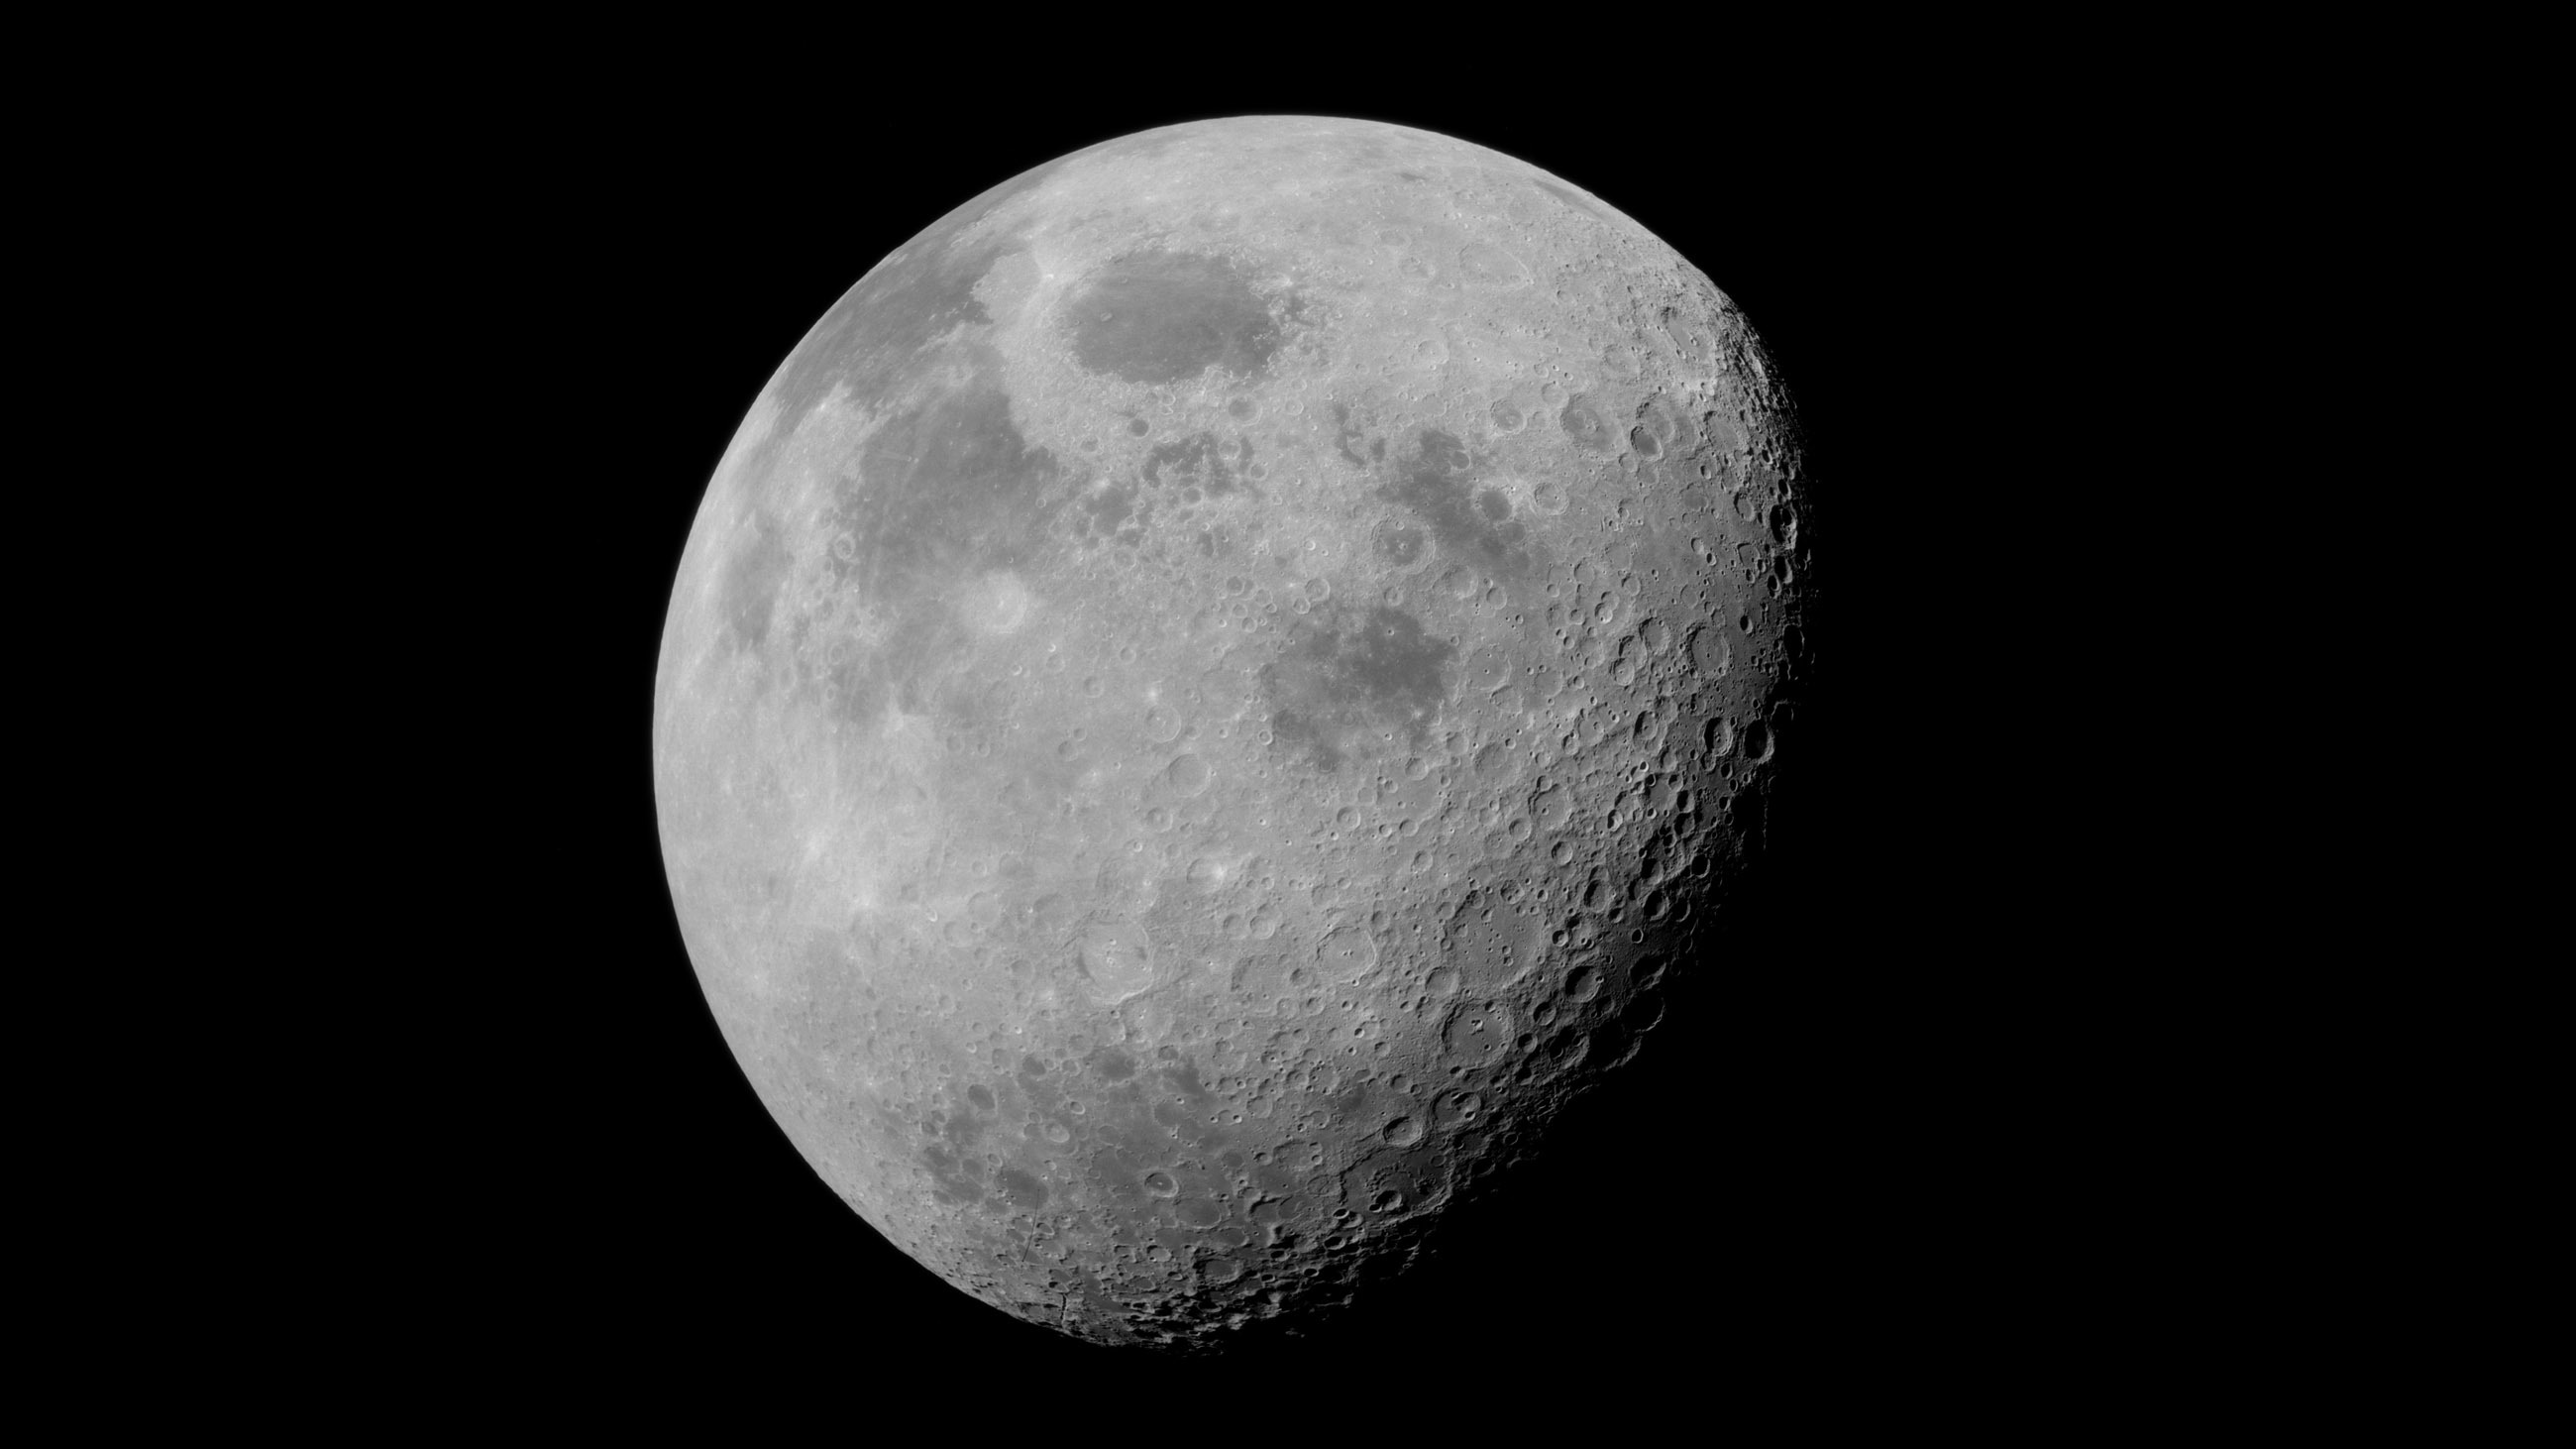 Scientists suspect there's ice hiding on the Moon, and a host of